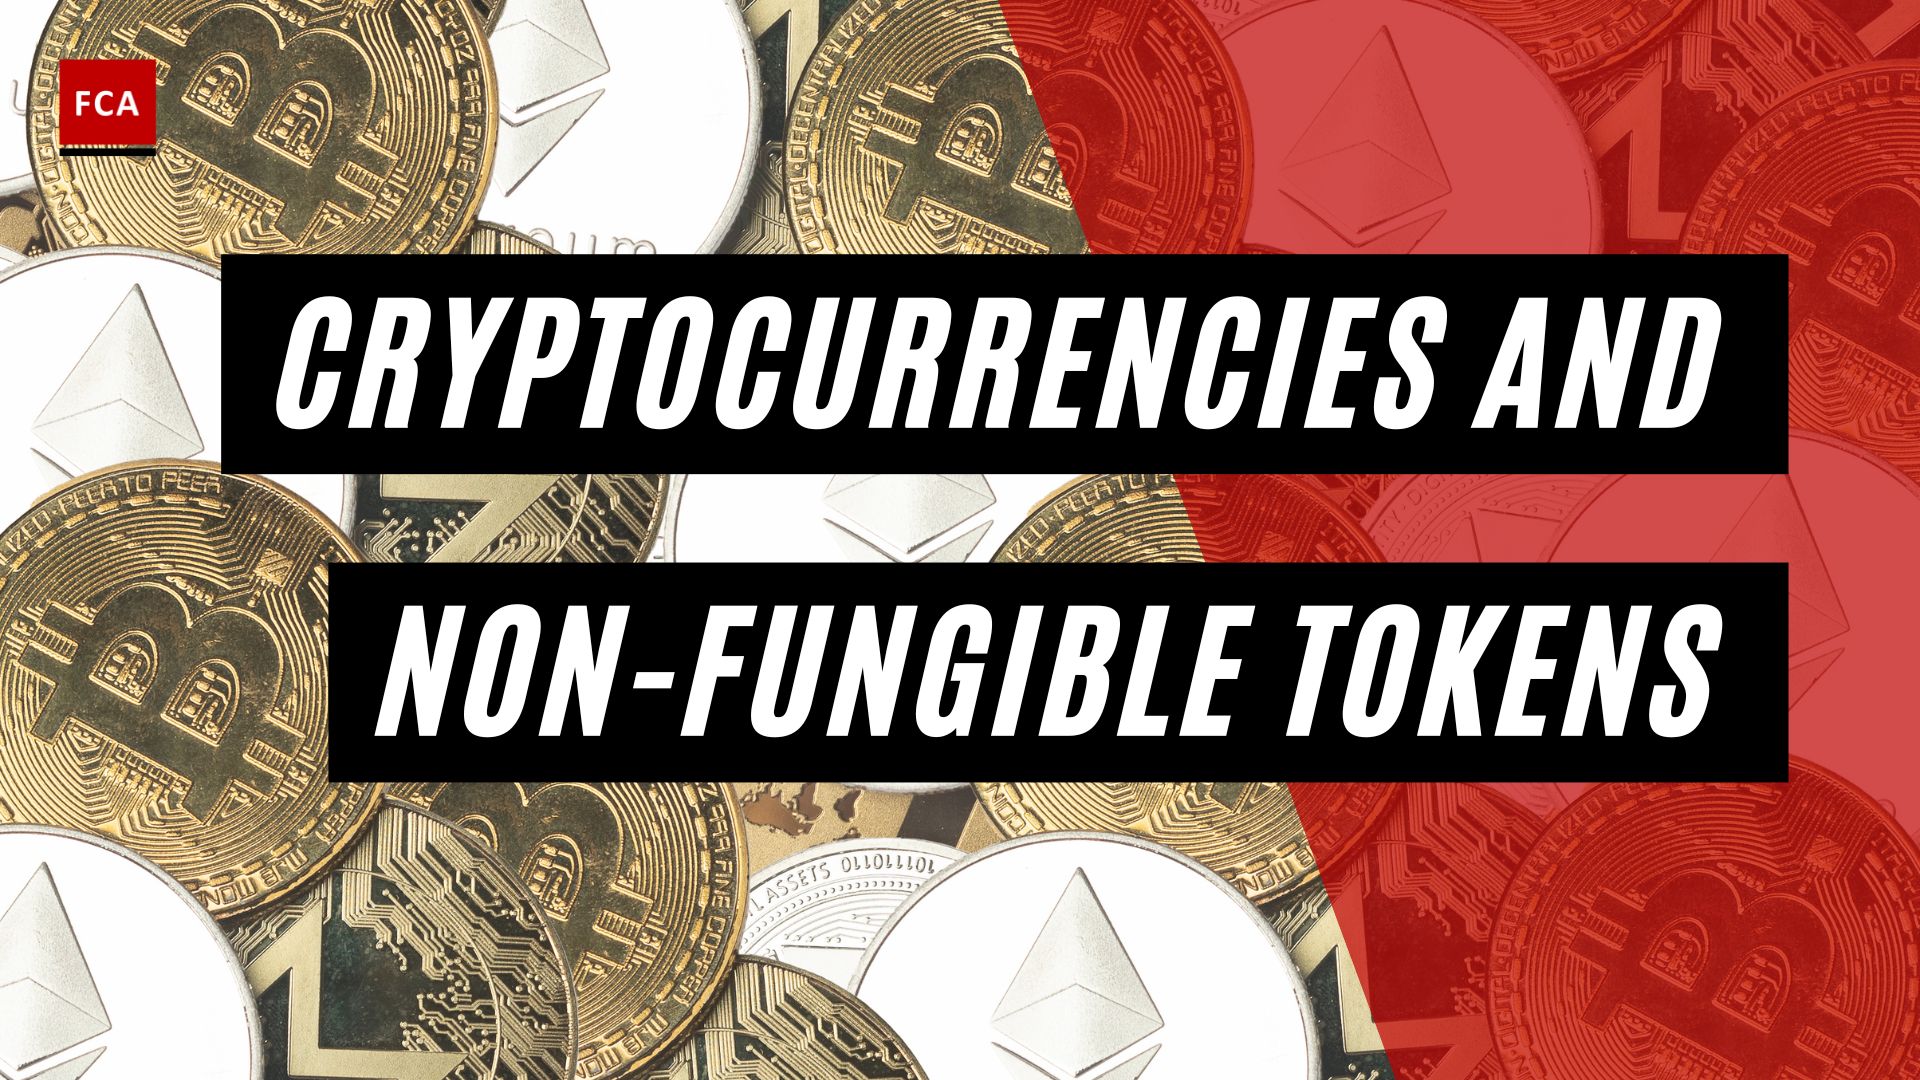 Cryptocurrencies And Non-Fungible Tokens